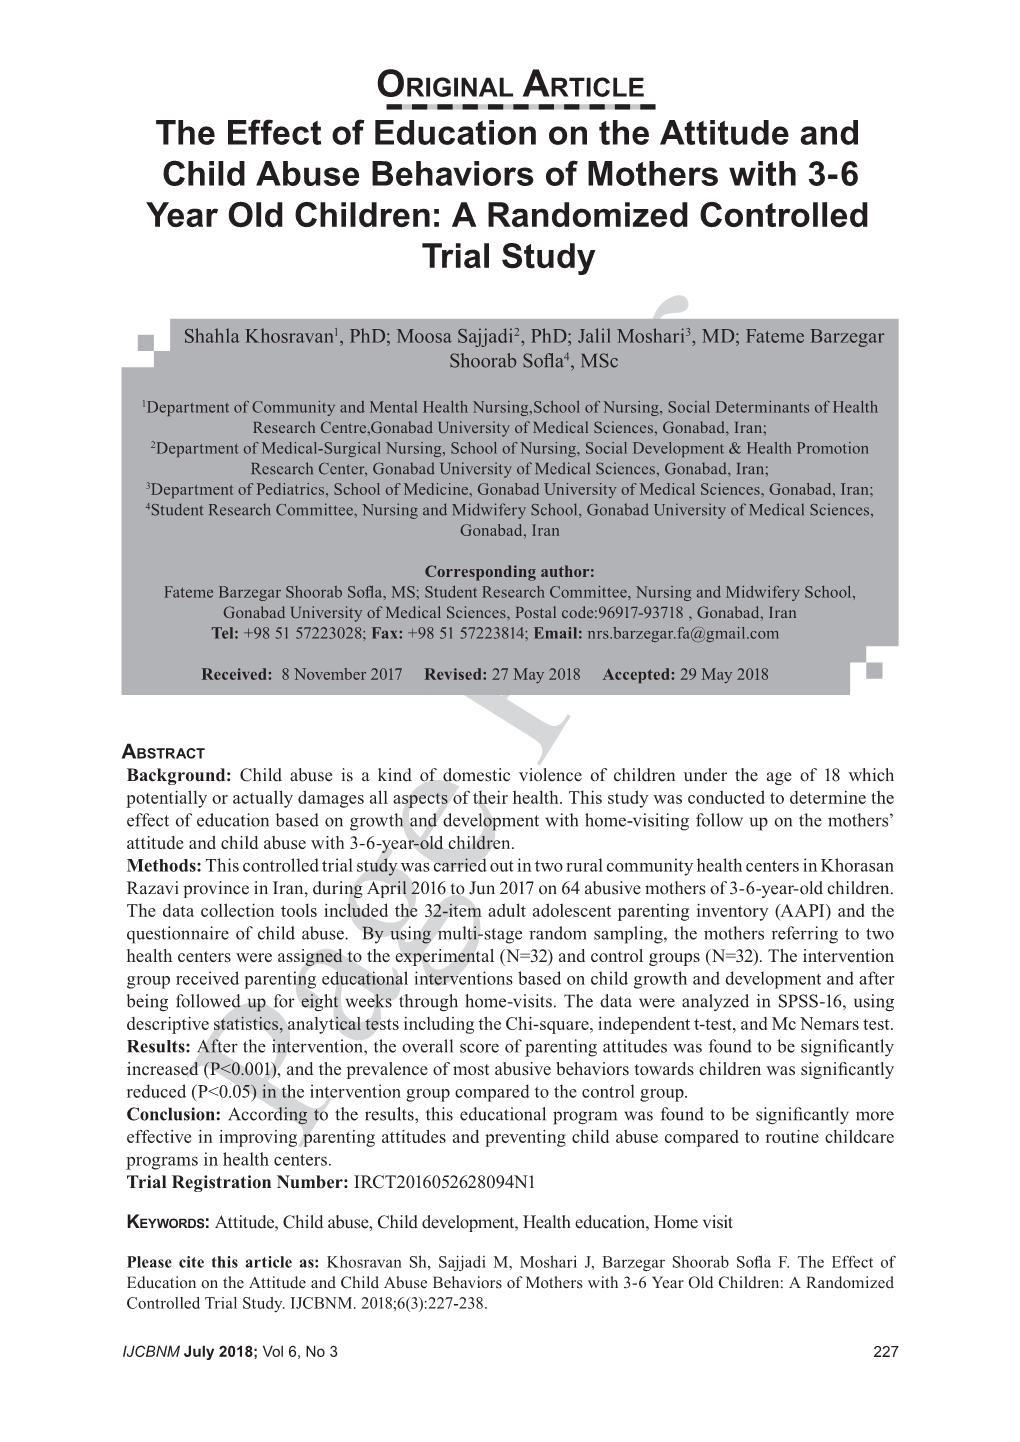 The Effect of Education on the Attitude and Child Abuse Behaviors of Mothers with 3-6 Year Old Children: a Randomized Controlled Trial Study